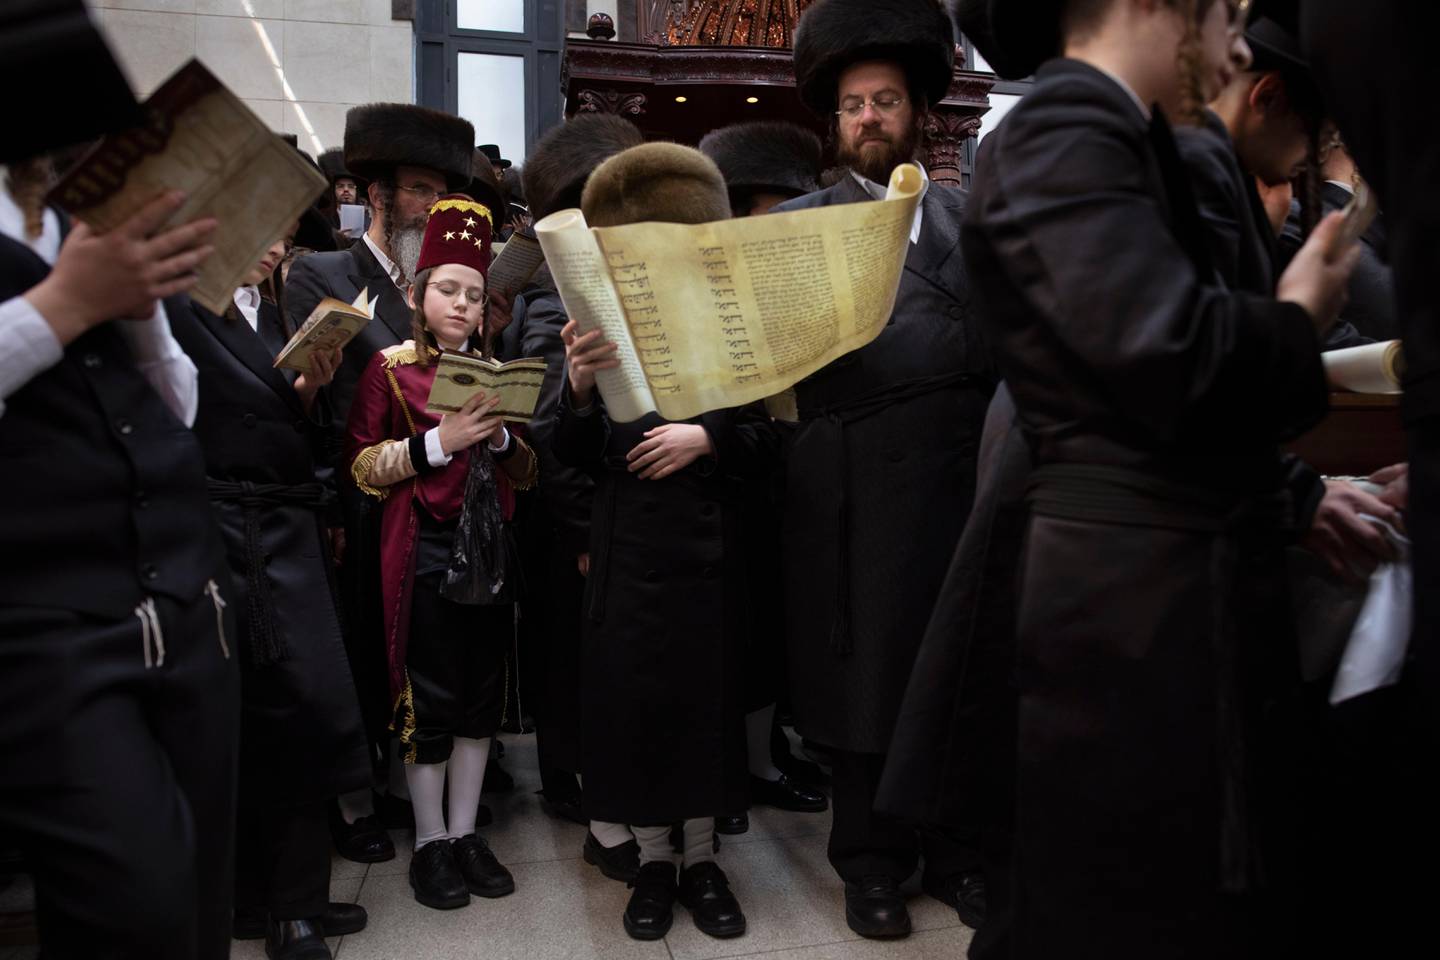 Jewish Ultra-Orthodox men and children, some wearing costumes, read the Book of Esther which tells the story of the Jewish festival of Purim, at a synagogue in Bnei Brak, Israel, Monday, March 9, 2020. The holiday commemorates the Jews' salvation from genocide in ancient Persia, as recounted in the Book of Esther. (AP Photo/Oded Balilty)